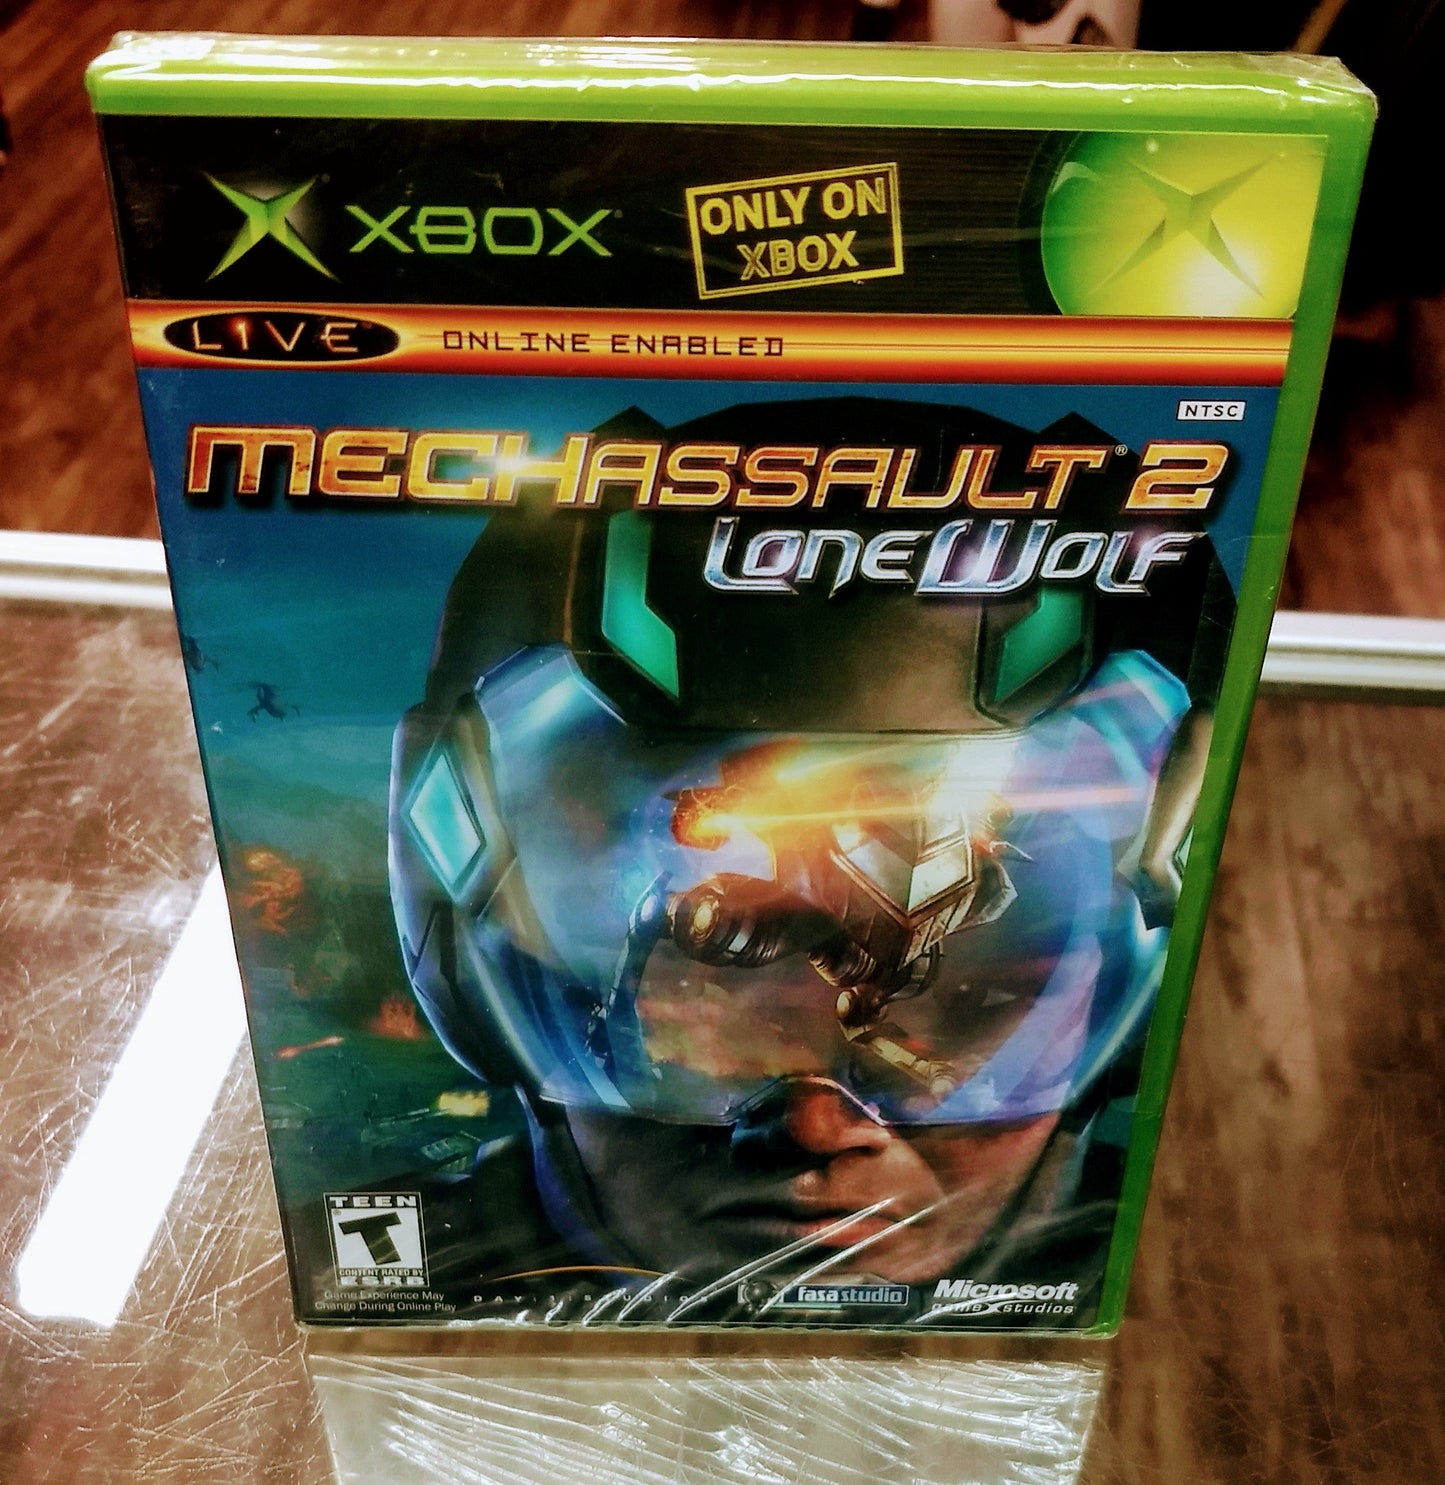 MECHASSAULT 2 LONE WOLF (XBOX) - jeux video game-x